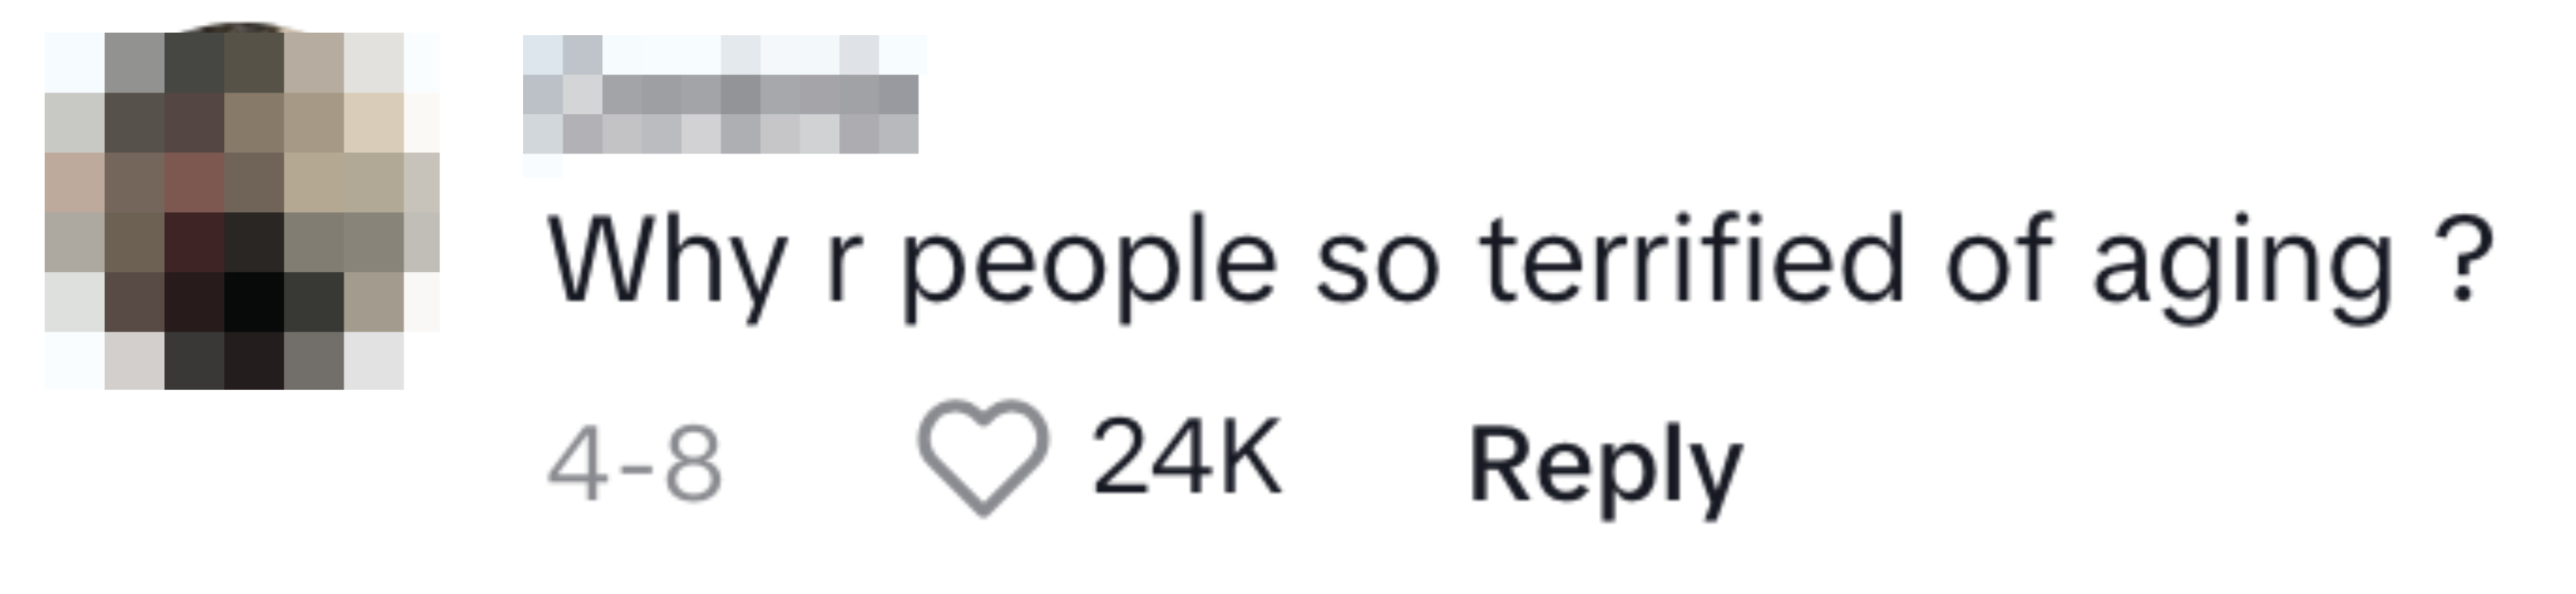 Social media comment with blurred user details asks &quot;Why r people so terrified of aging?&quot; and shows 24K likes